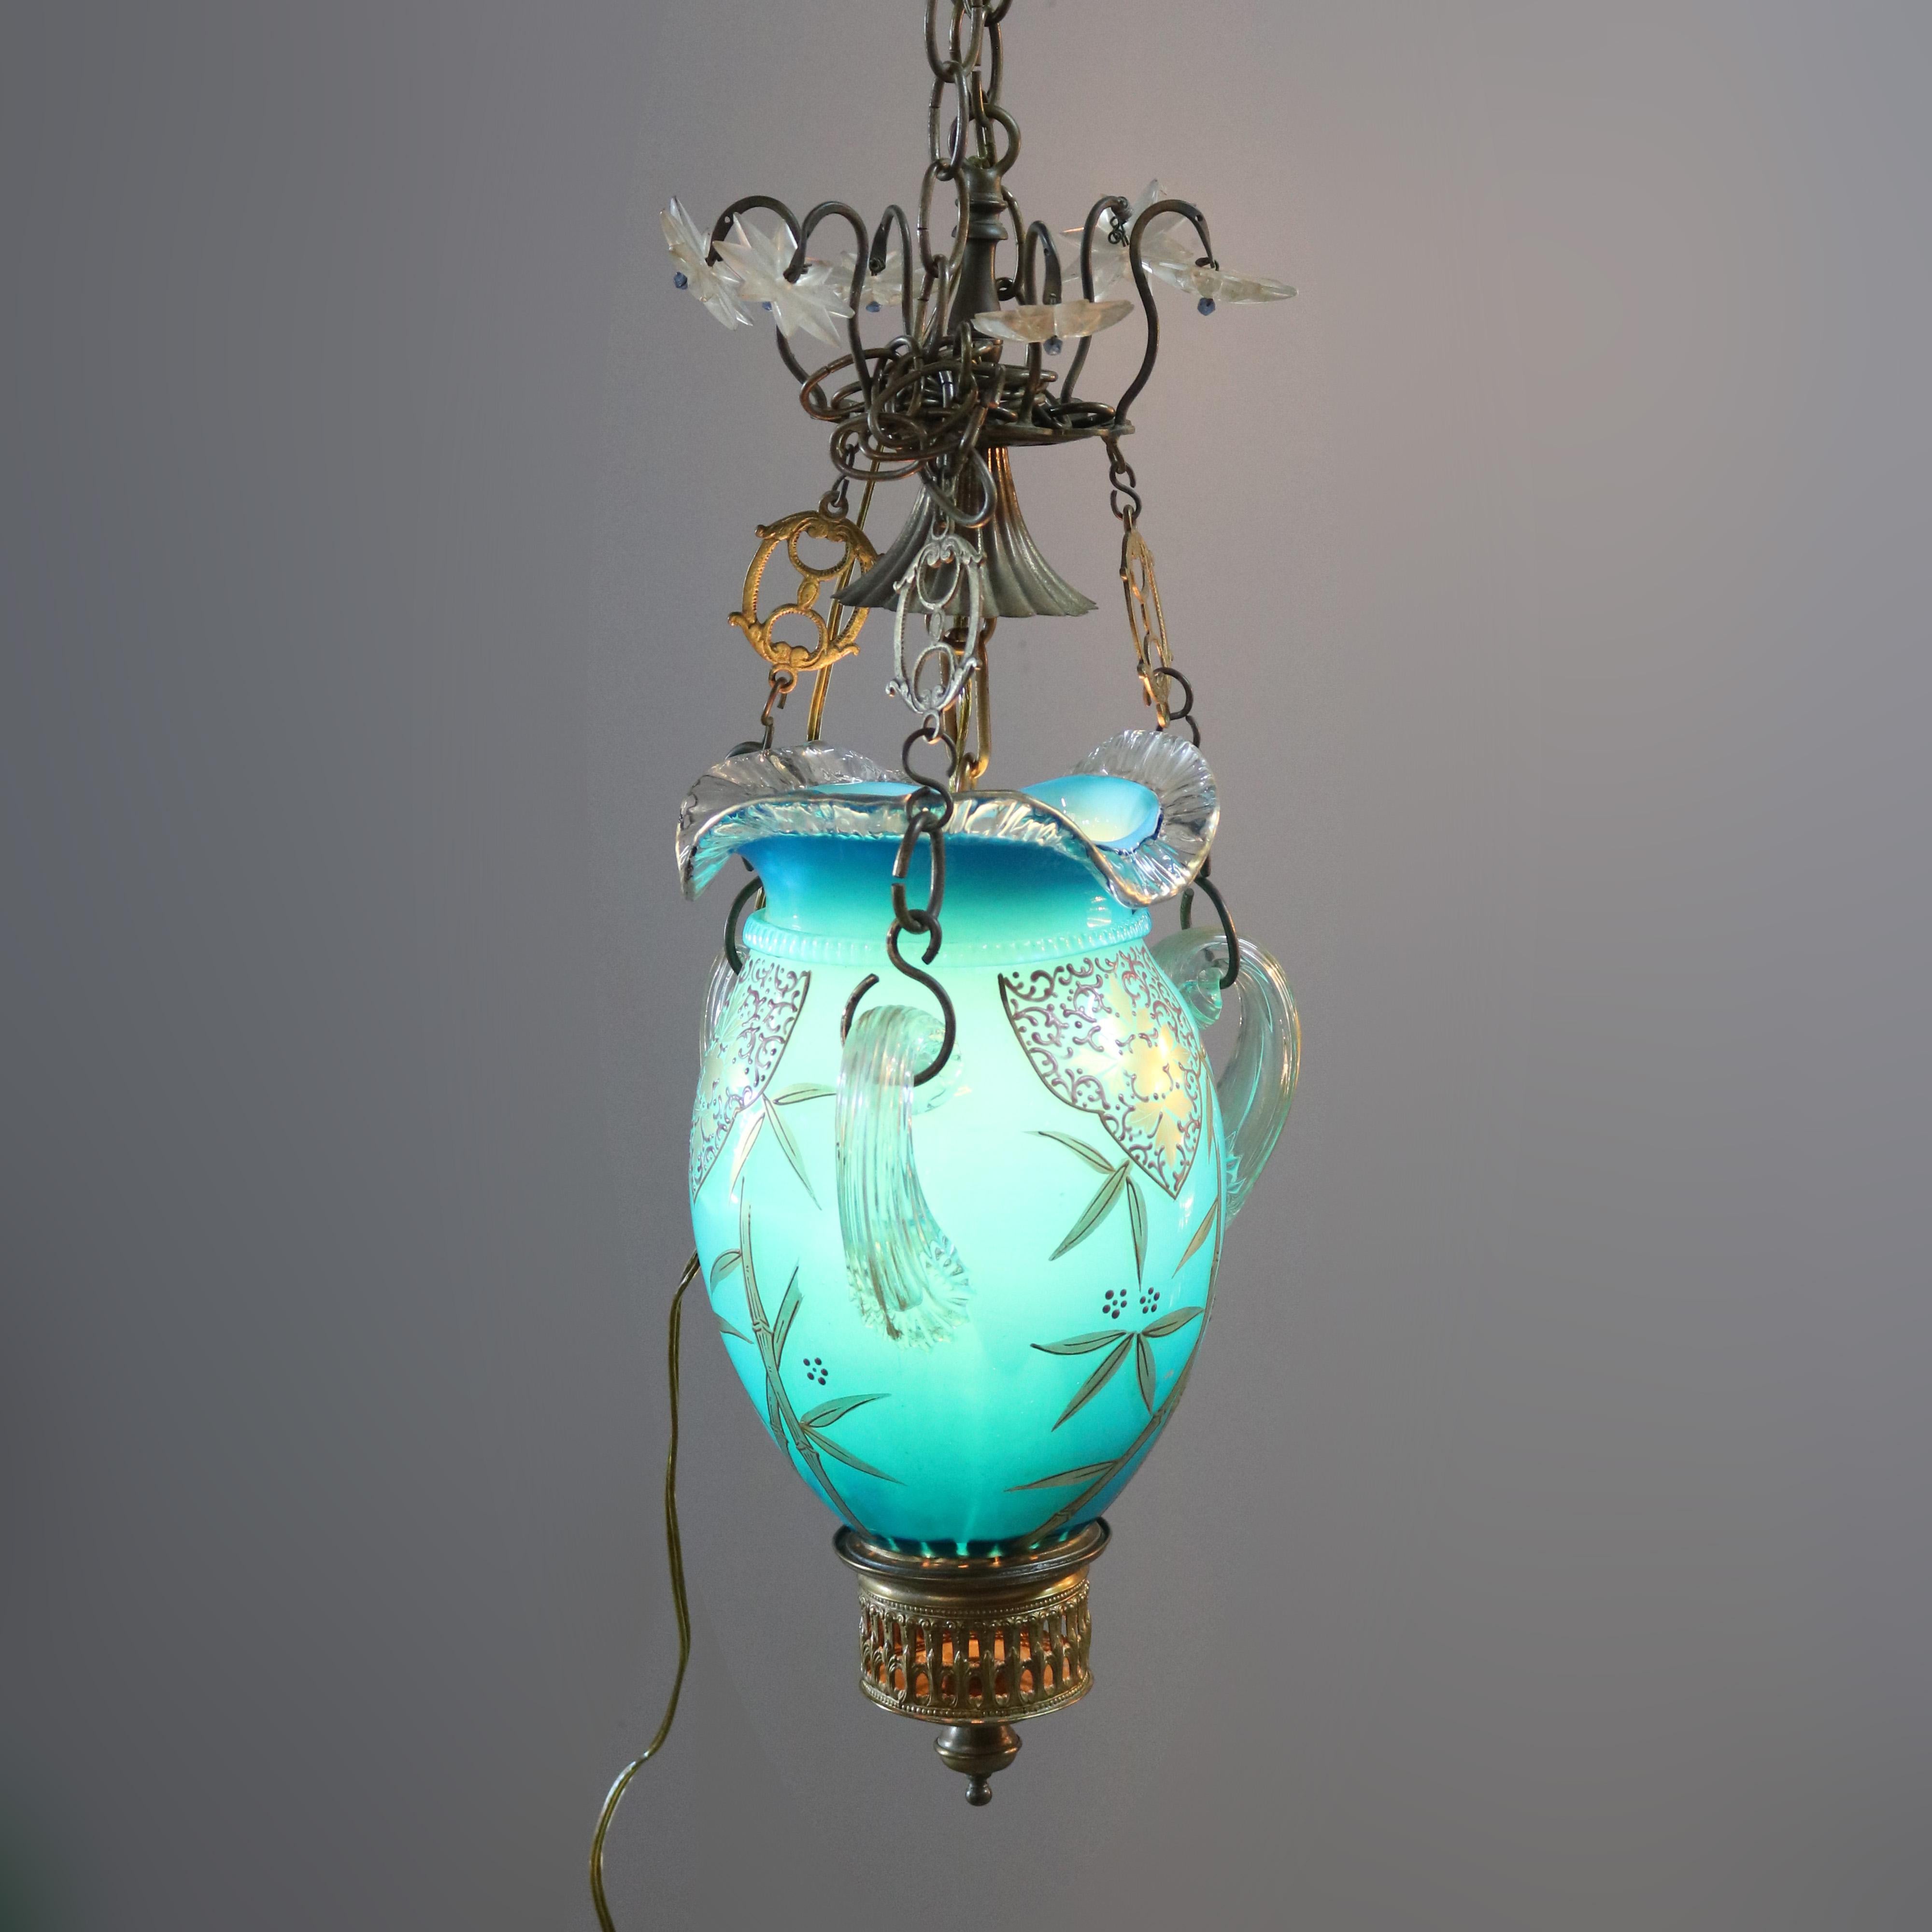 An antique Victorian pendant light offers blue cased art glass construction with hand gilt foliate decoration, elements of Gothic, circa 1890. 

Measures: 24